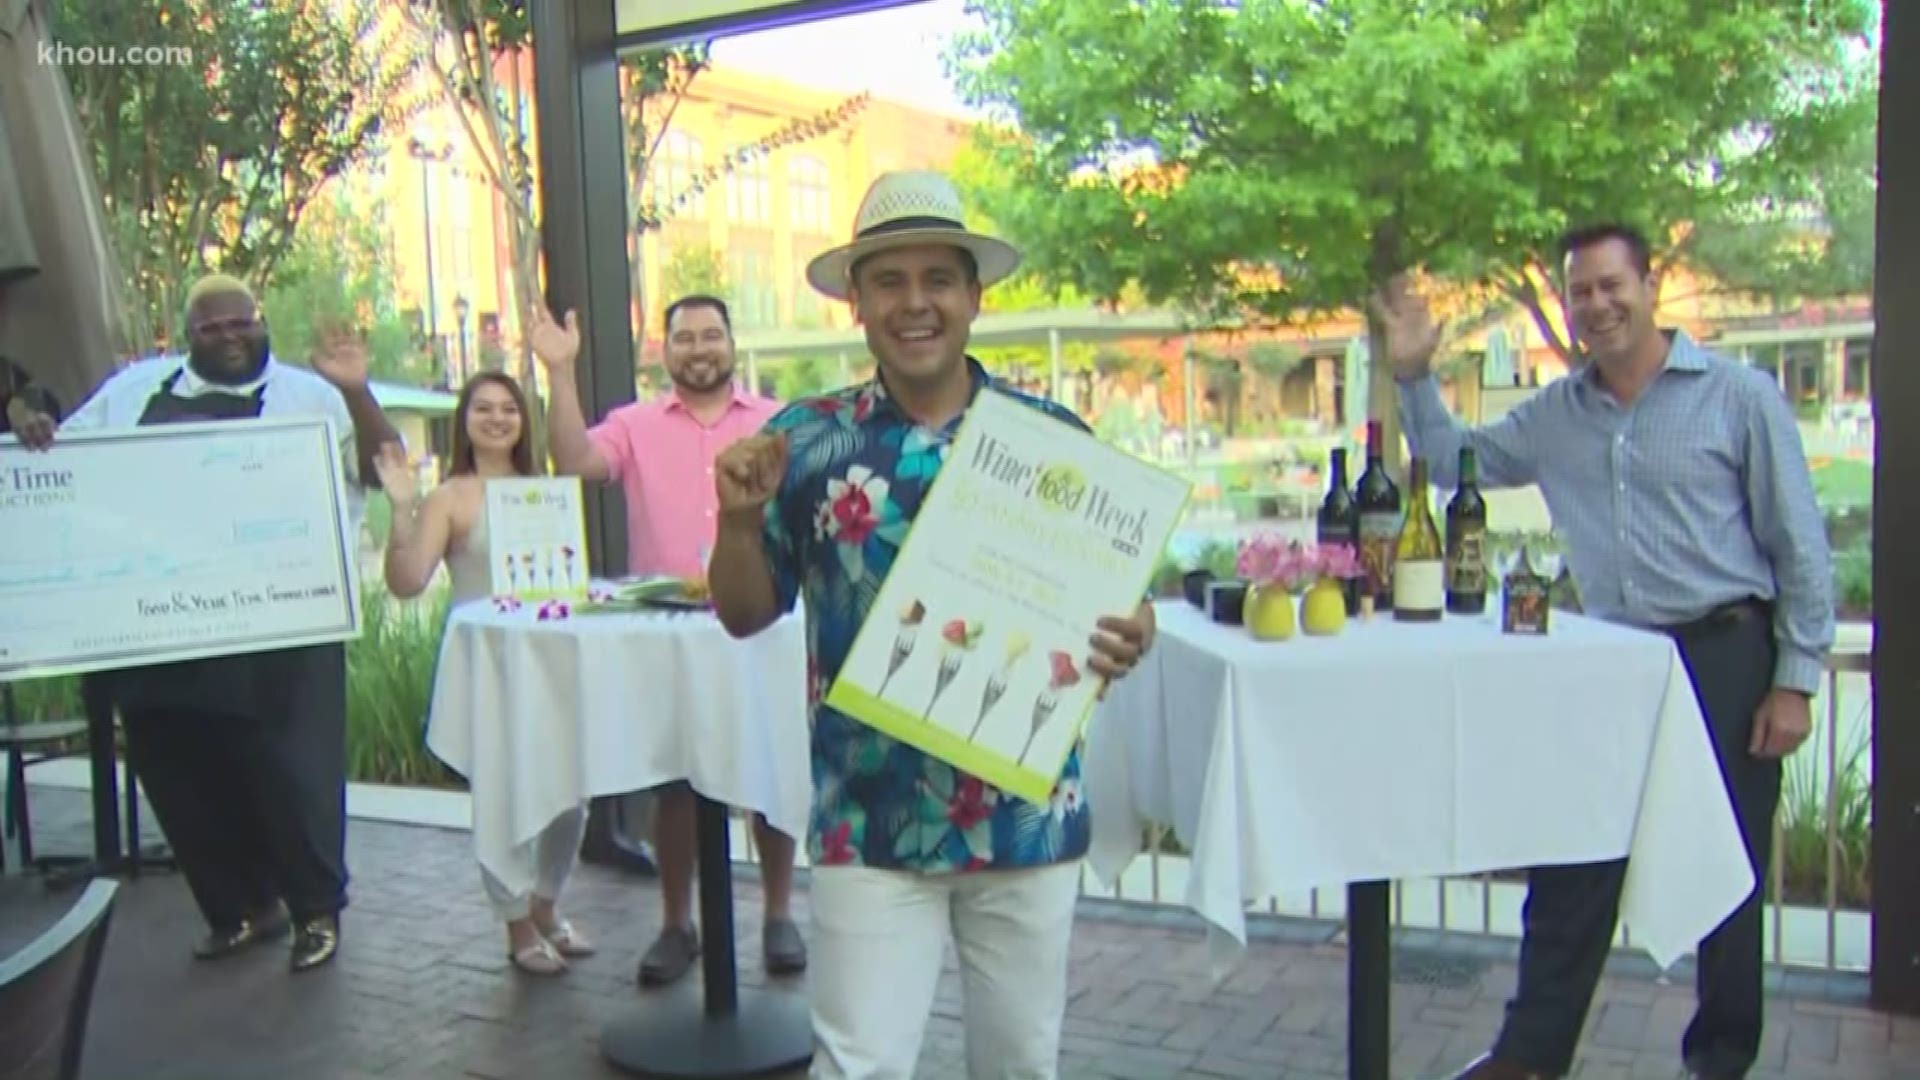 Calling all wine lovers! Today kicks off Wine and Food Week in The Woodlands. From wine walks to chef competitions – it's certainly an event you don't want to miss. Our Ruben Galvan was live this morning at Tommy Bahama Restaurant, Bar & Store in The Woodlands.